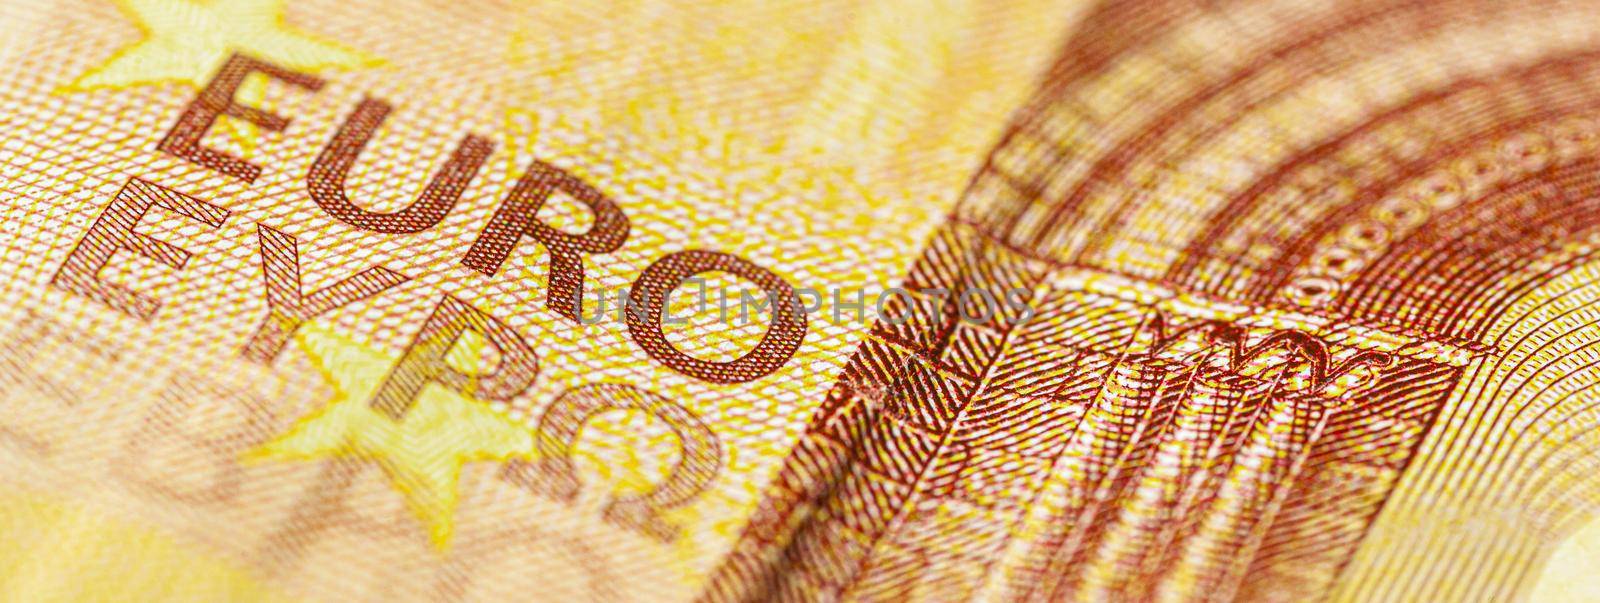 Euro bill detail banner 2 by pippocarlot